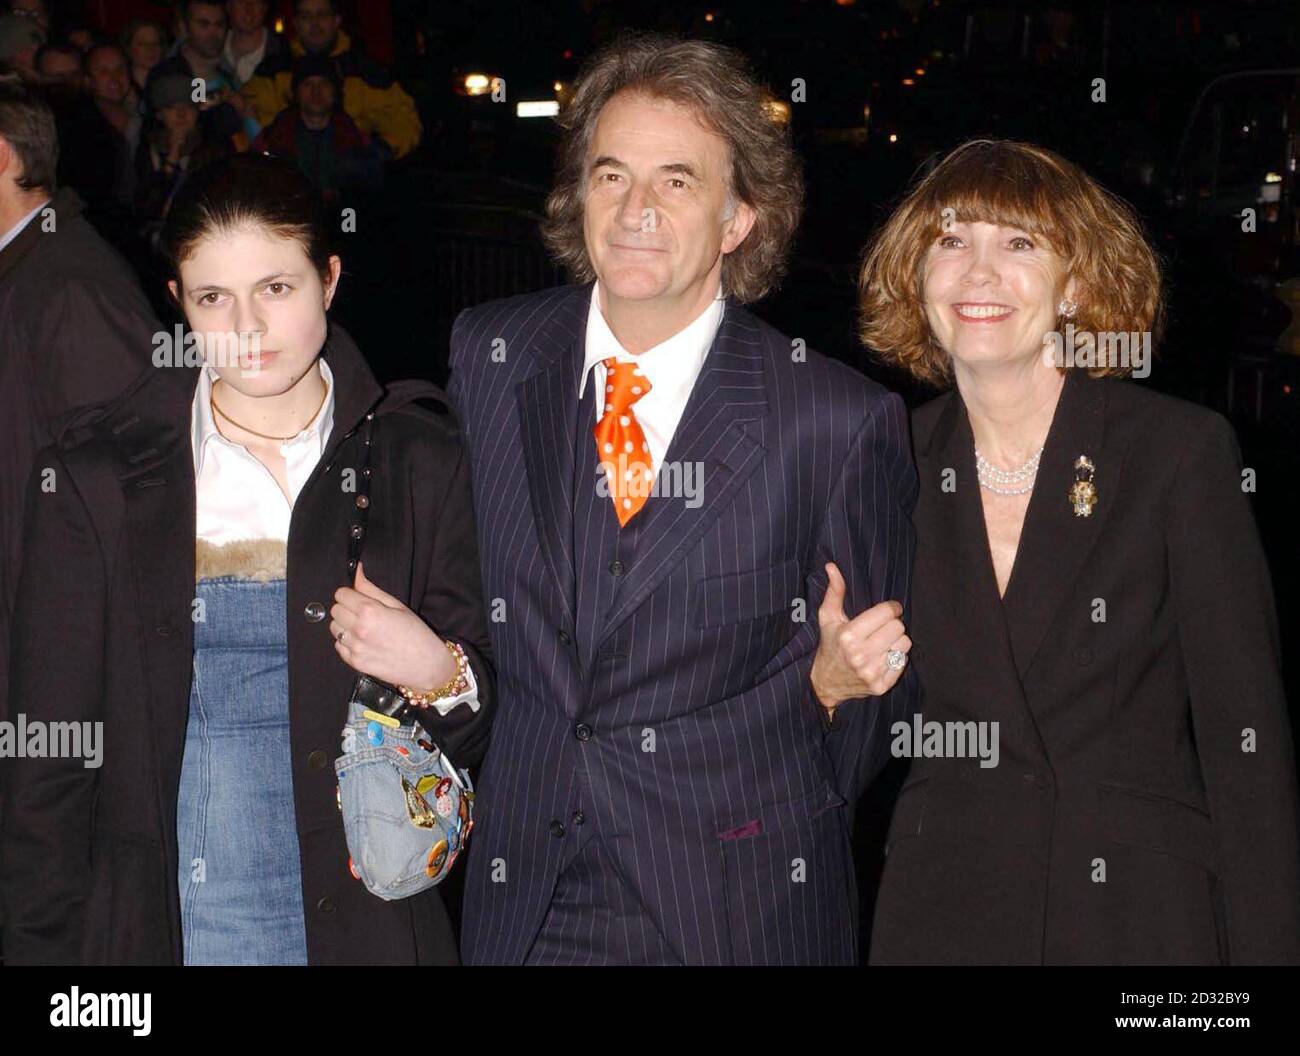 Fashion designer Sir Paul Smith with his wife Pauline arrives at the  National Portrait Gallery in London for a private party to celebrate the  launch of an exhibition of celebrity portraiture by